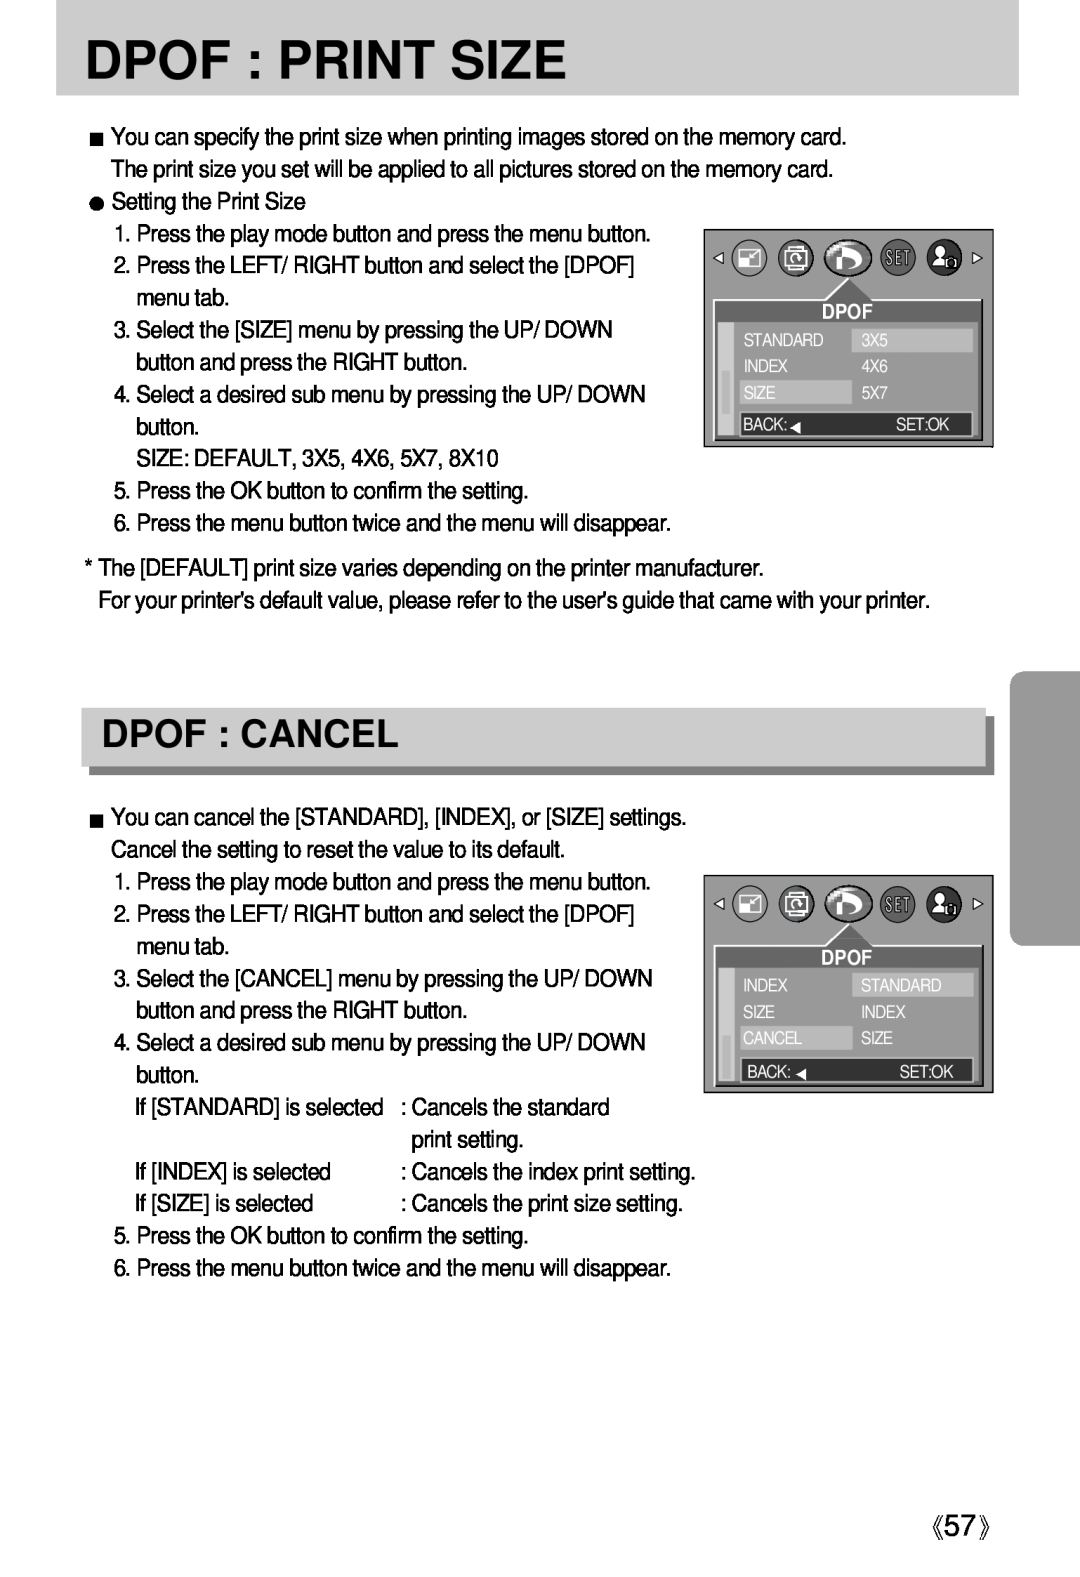 Samsung Digimax U-CA Dpof Print Size, Dpof Cancel, Setting the Print Size, menu tab, button and press the RIGHT button 